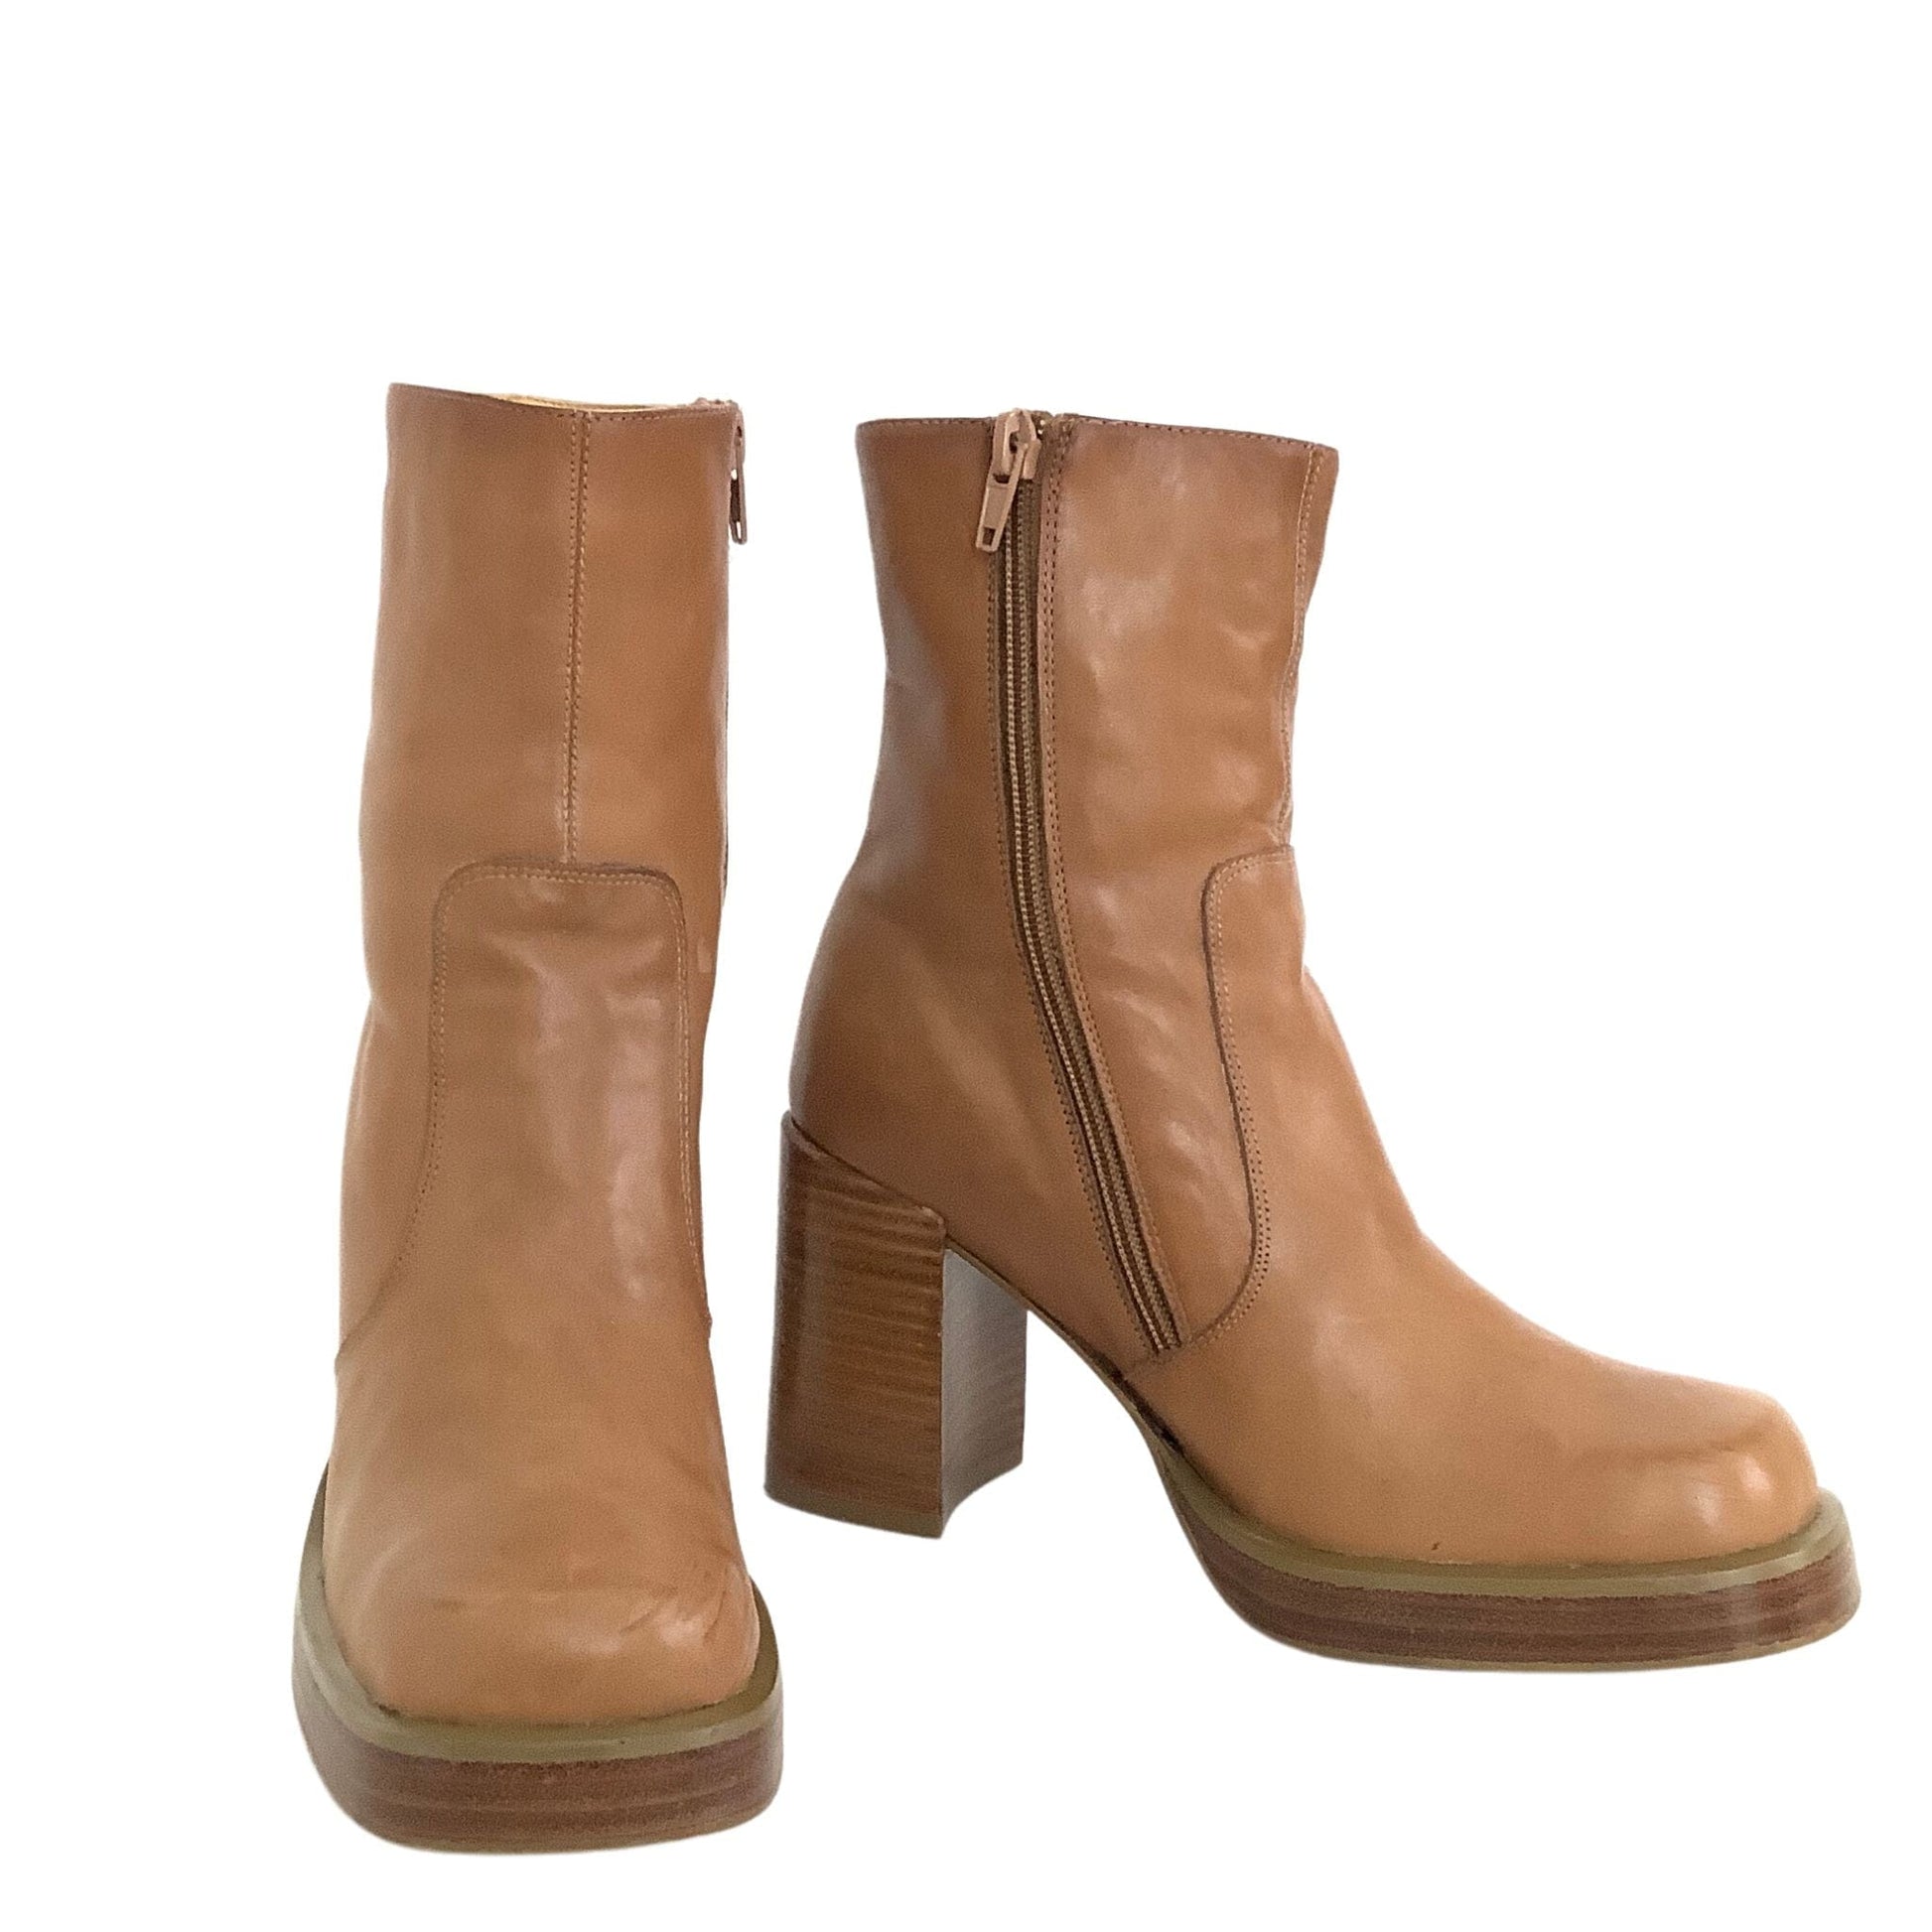 Y2K Chunky Ankle Boots 7 / Tan / Y2K - Now